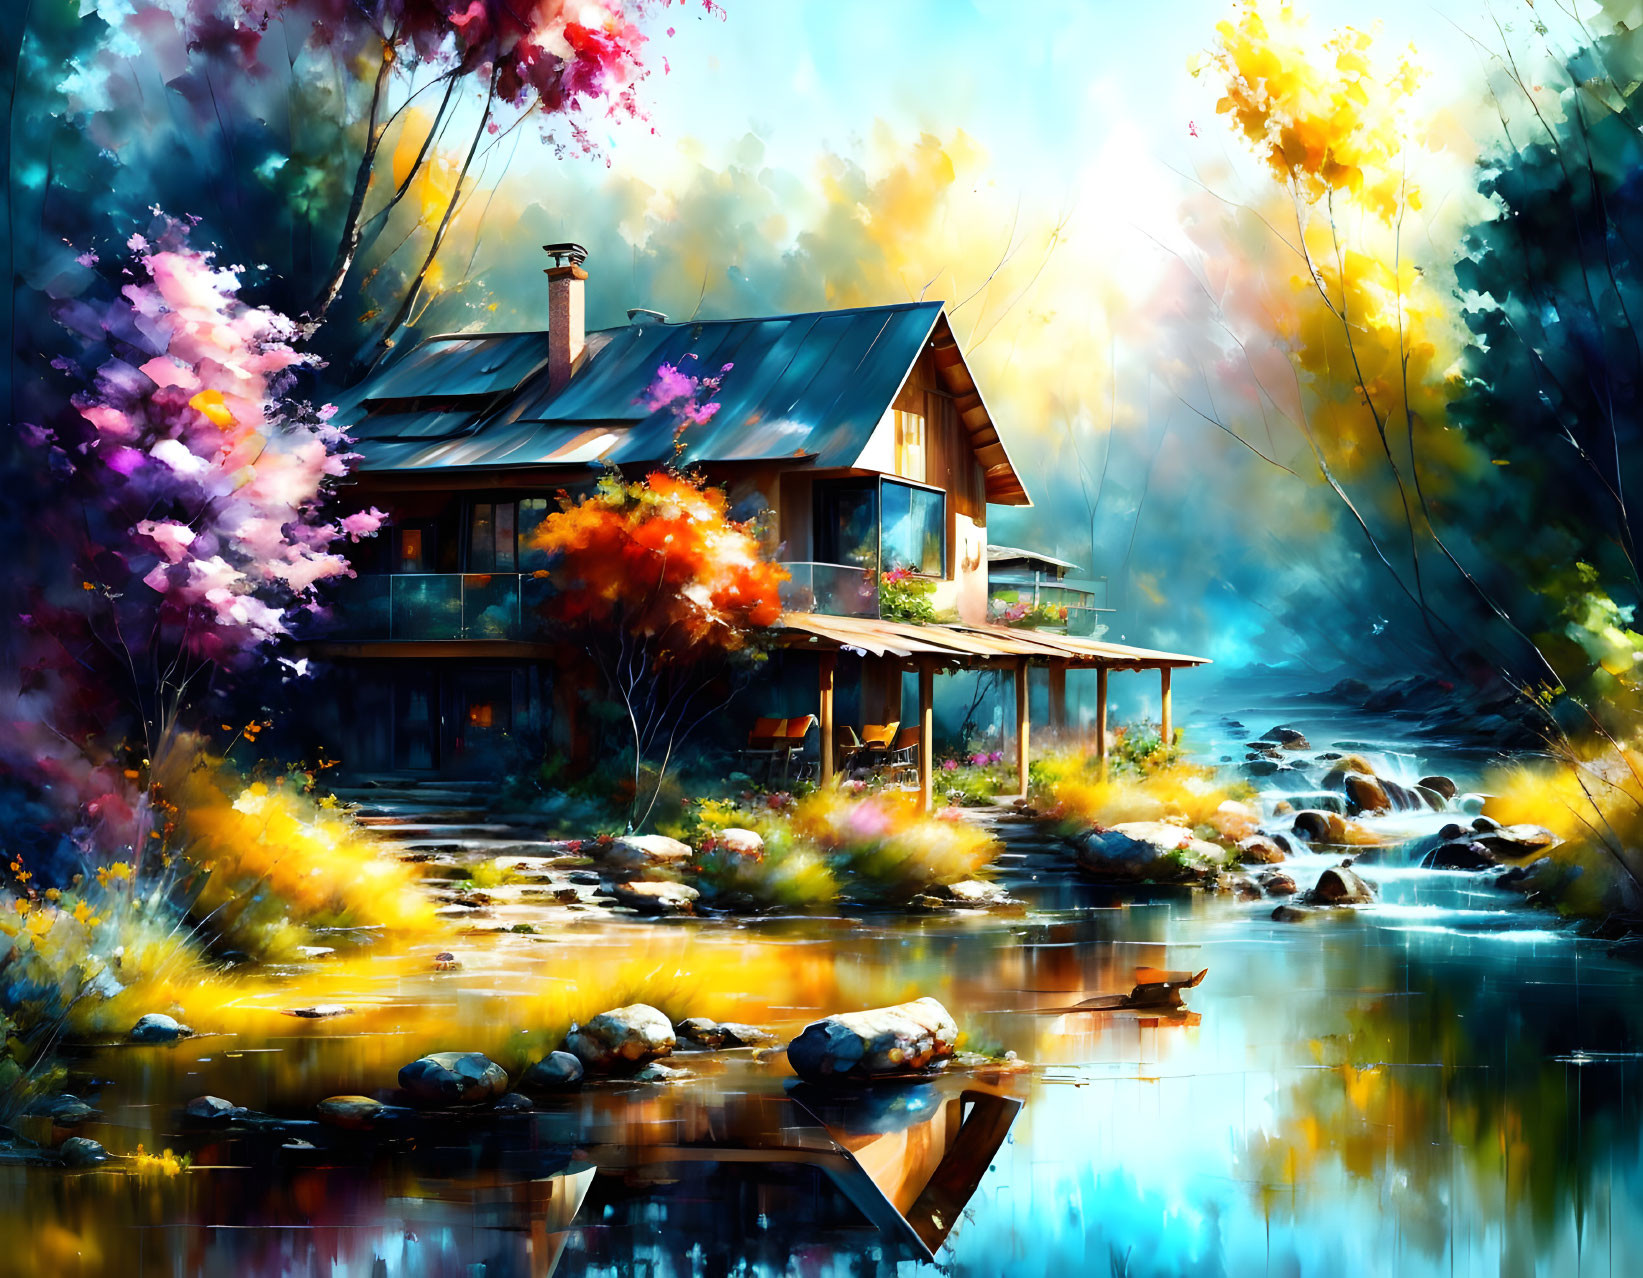 Home near the river